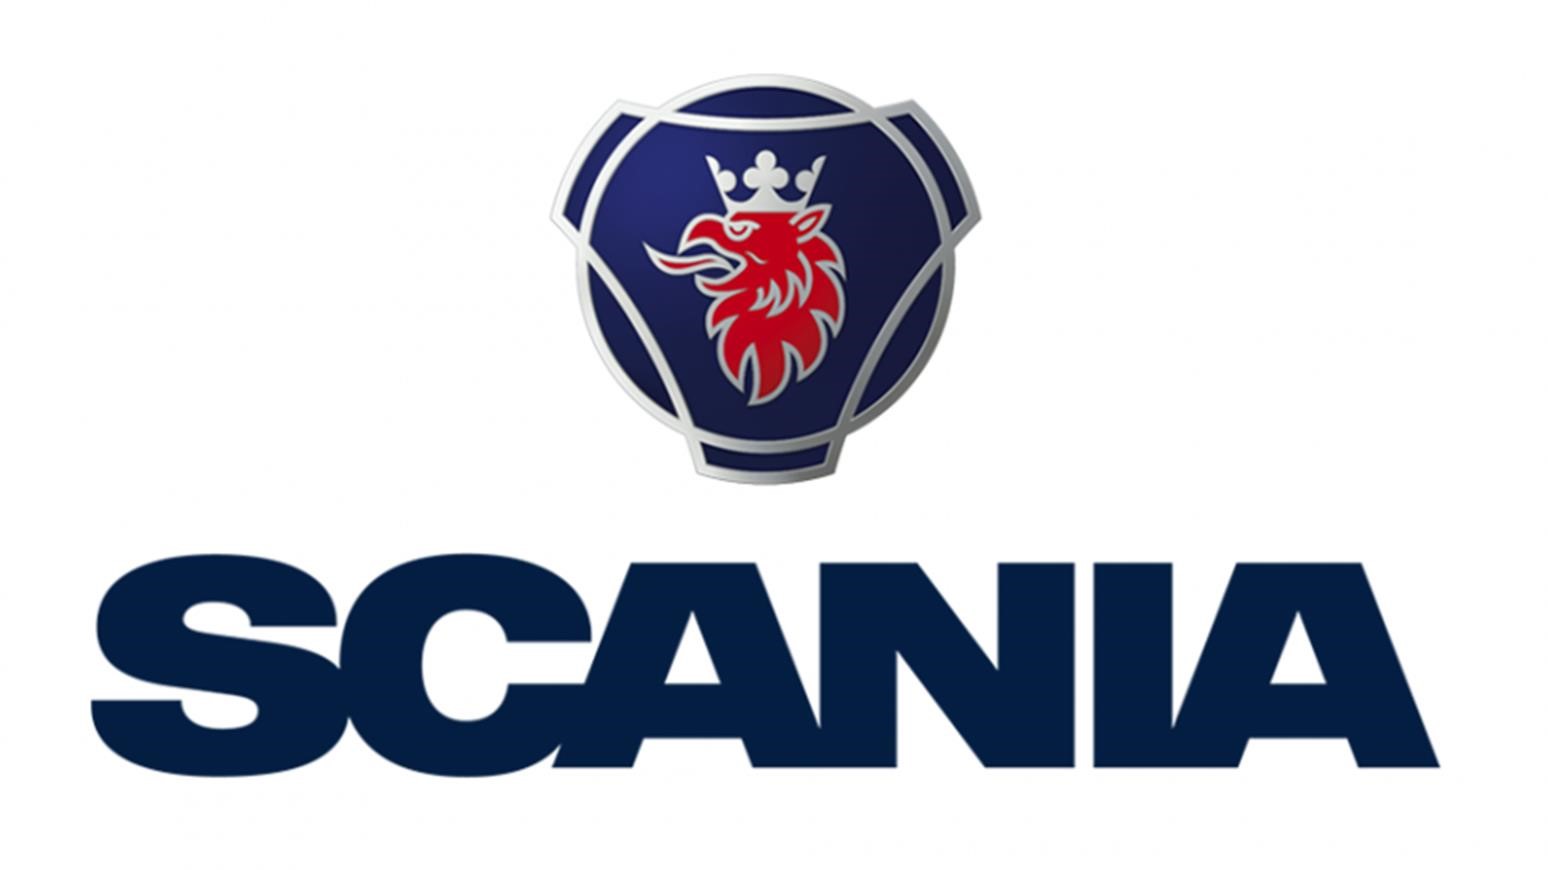 Scania Receives Greener Supply Chain Award At The 2018 Automotive Logistics Awards